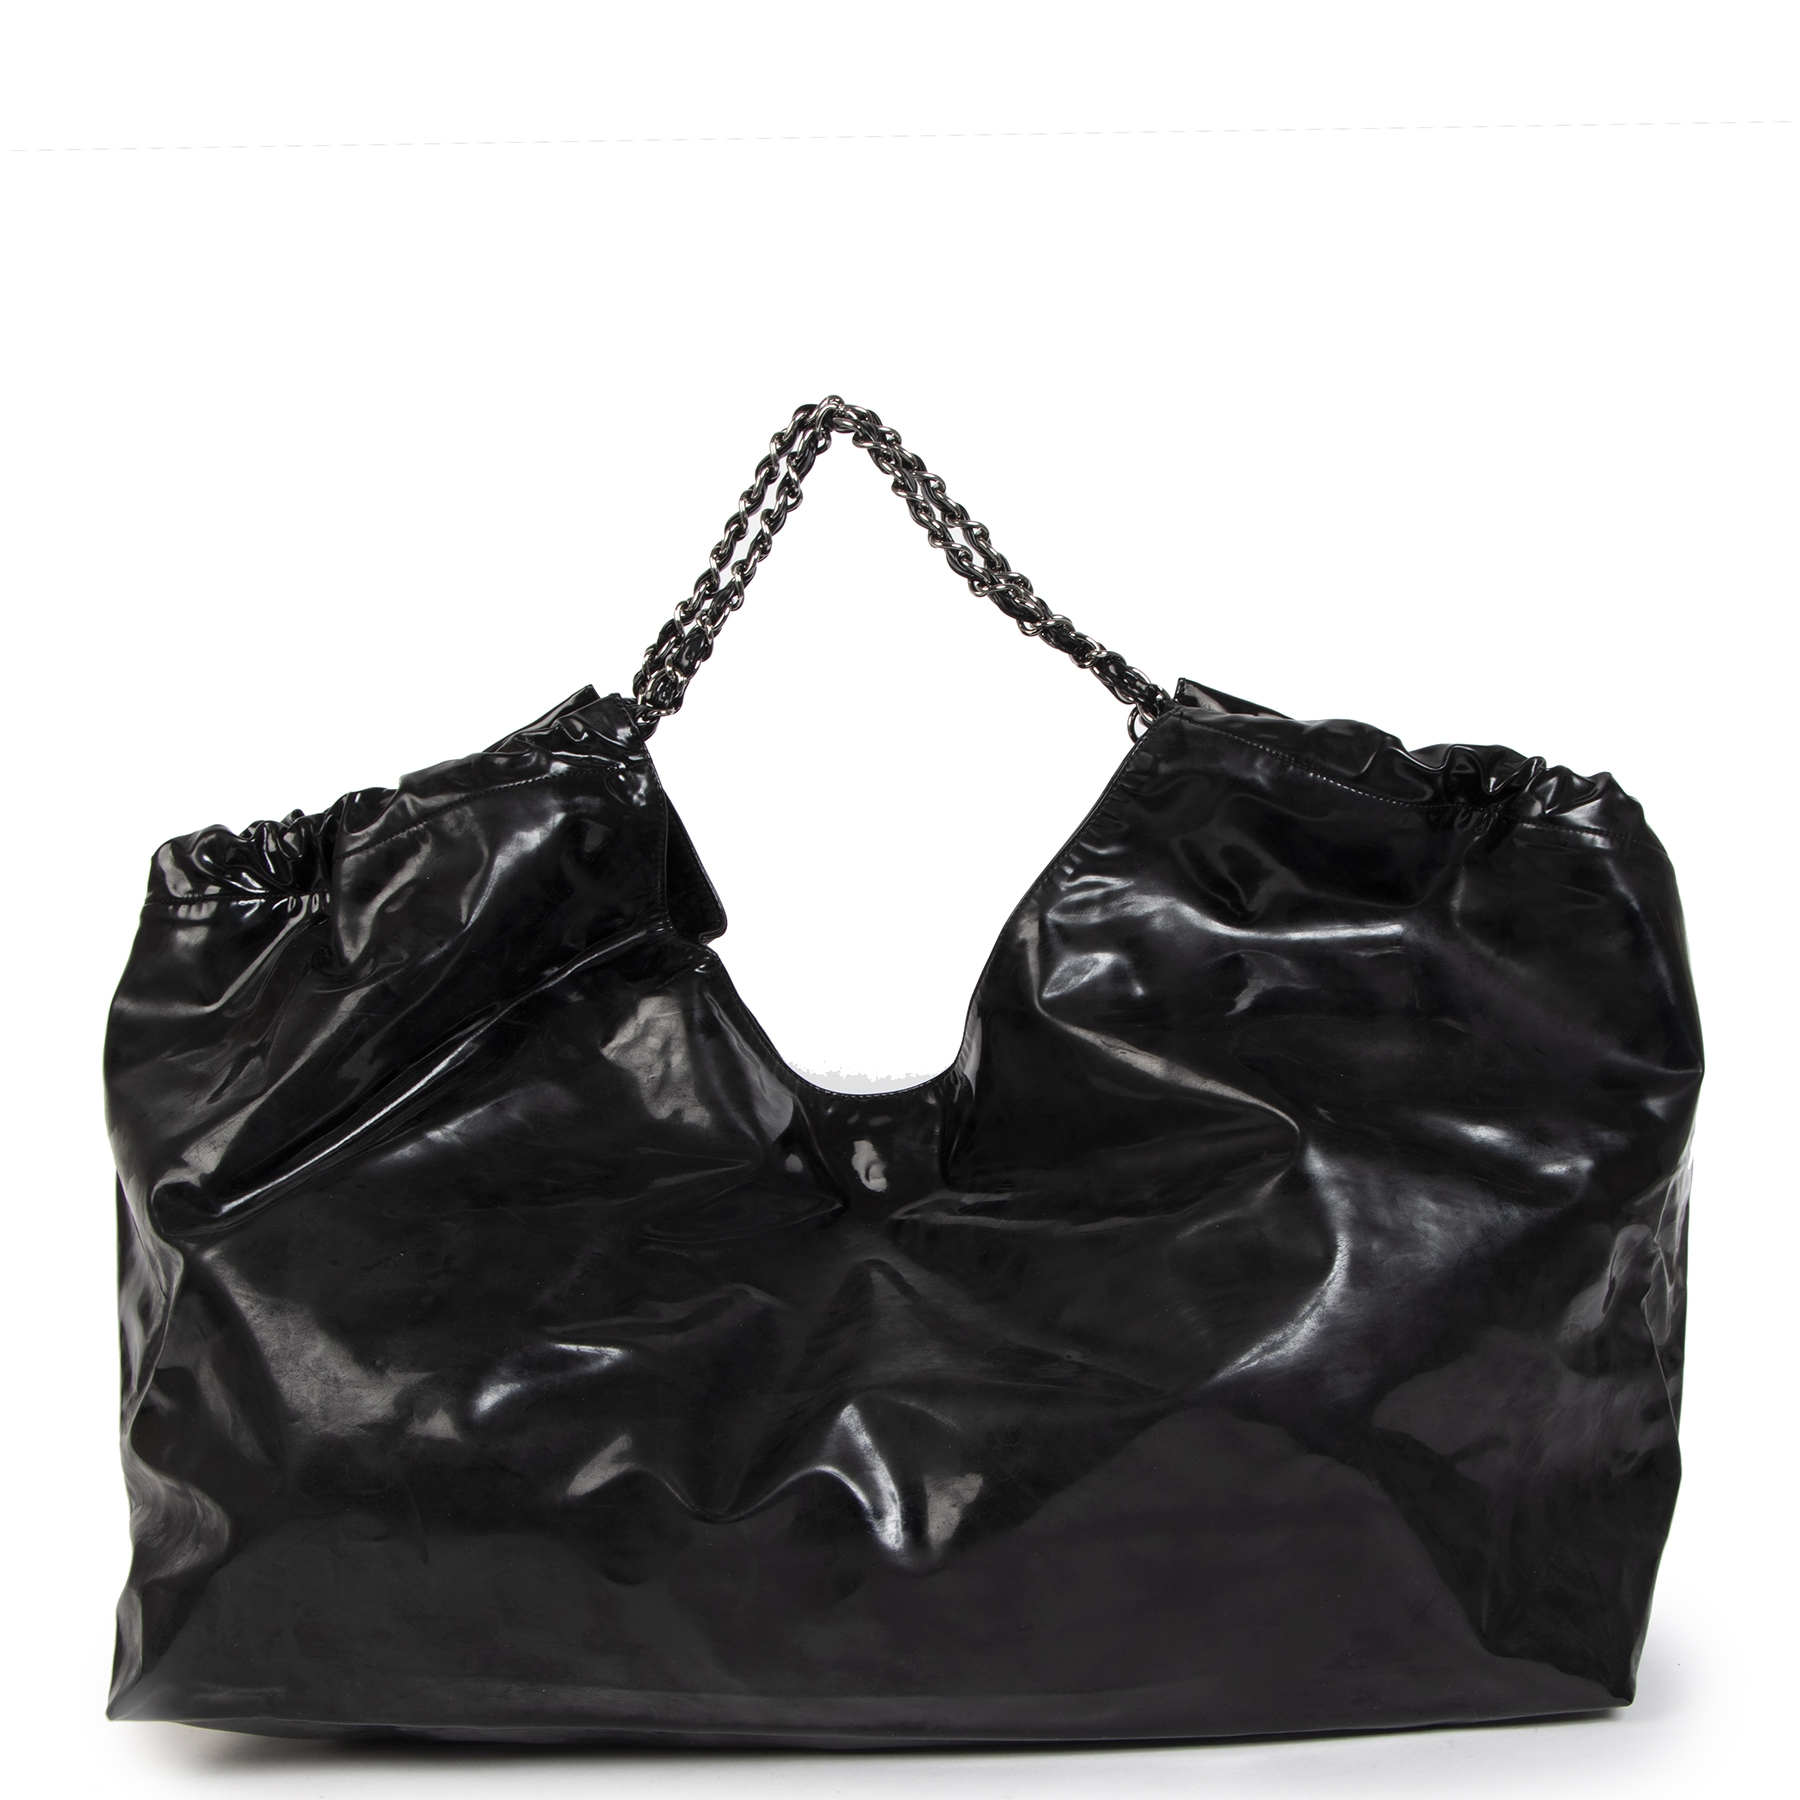 Chanel Coco Cabas XL black vinyl tote bag with silver-toned hardware sold  at auction on 2nd June